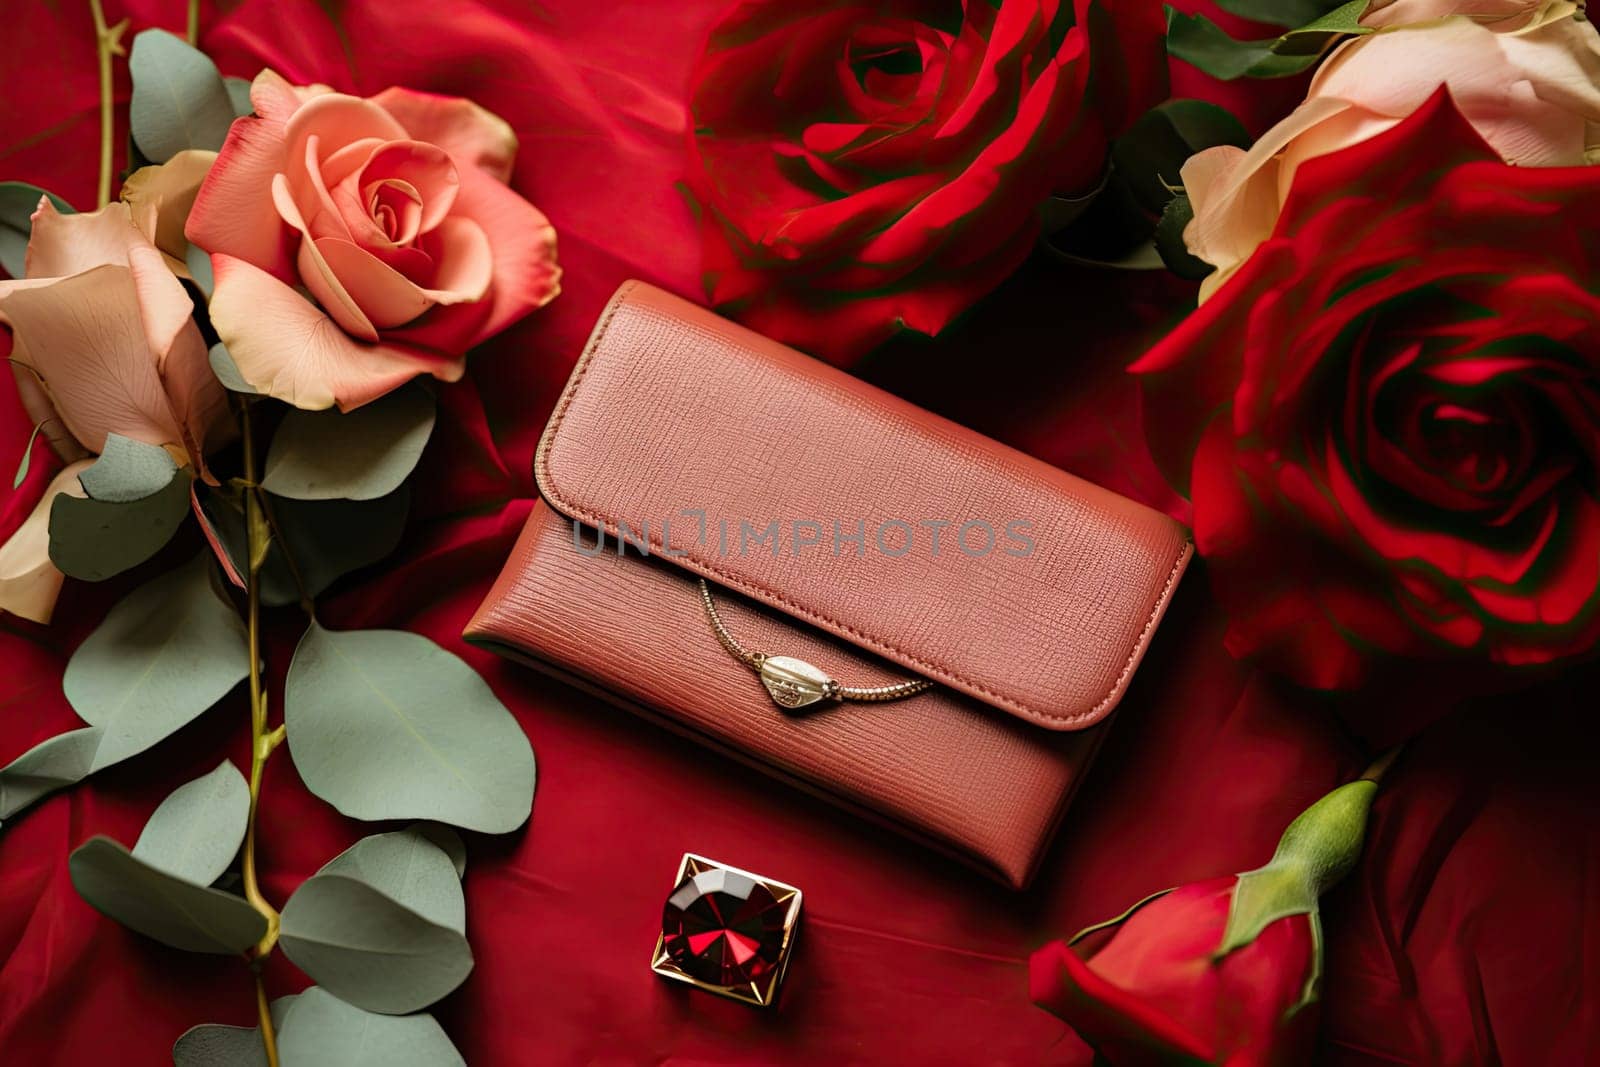 A Romantic Gesture: A Bouquet of Roses and a Wallet on a Red Cloth